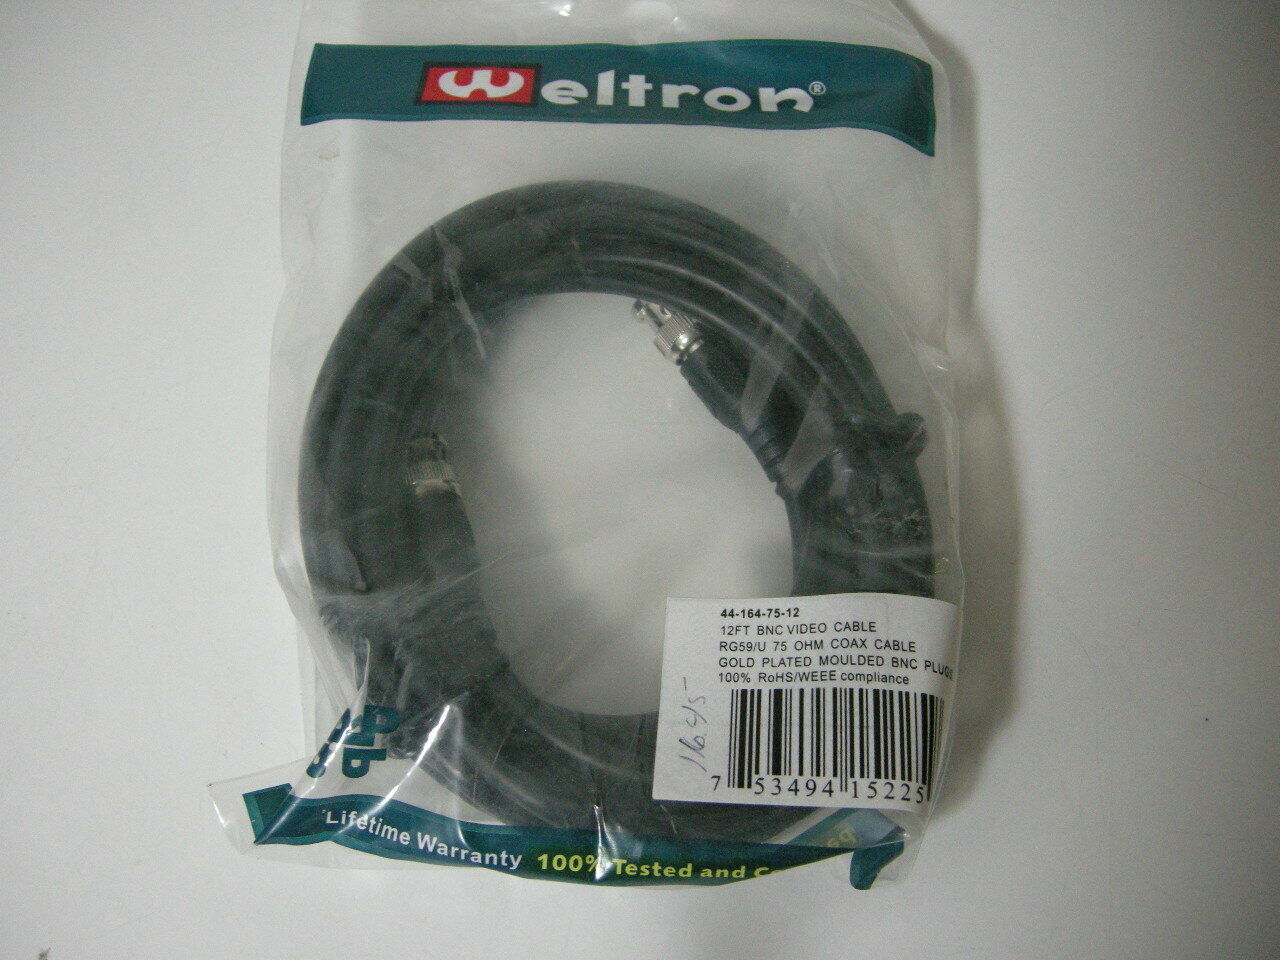 Weltron 44-164-75-12 12ft Bnc Video Cable Rg59/u 75 Ohm Coax Cable - New